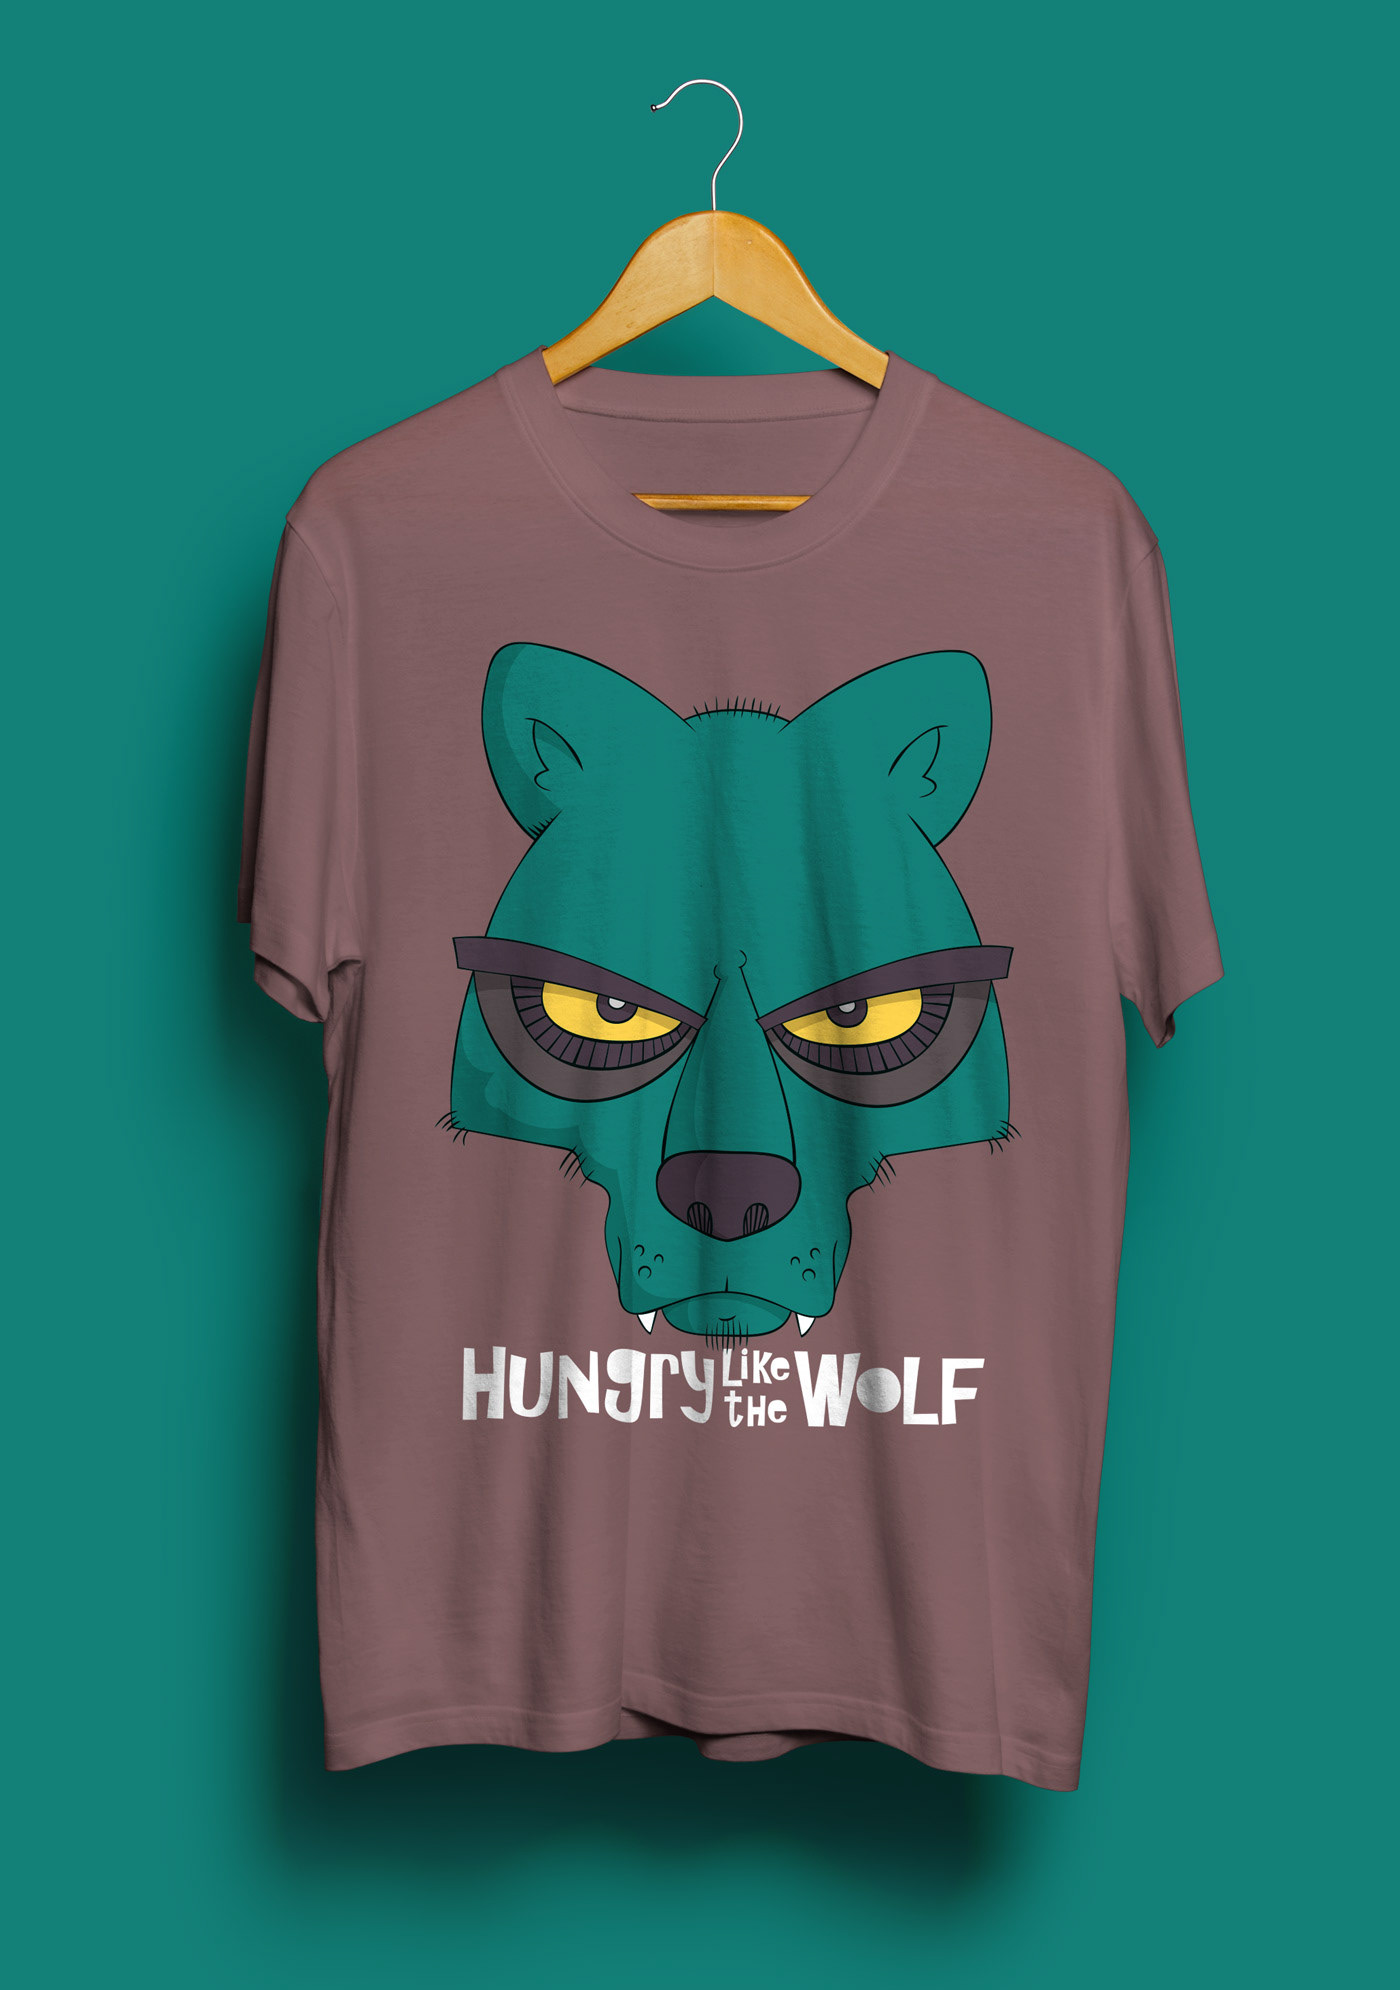 wolf wolves Hungry funny cute tee tshirtdesign ILLUSTRATION  animal